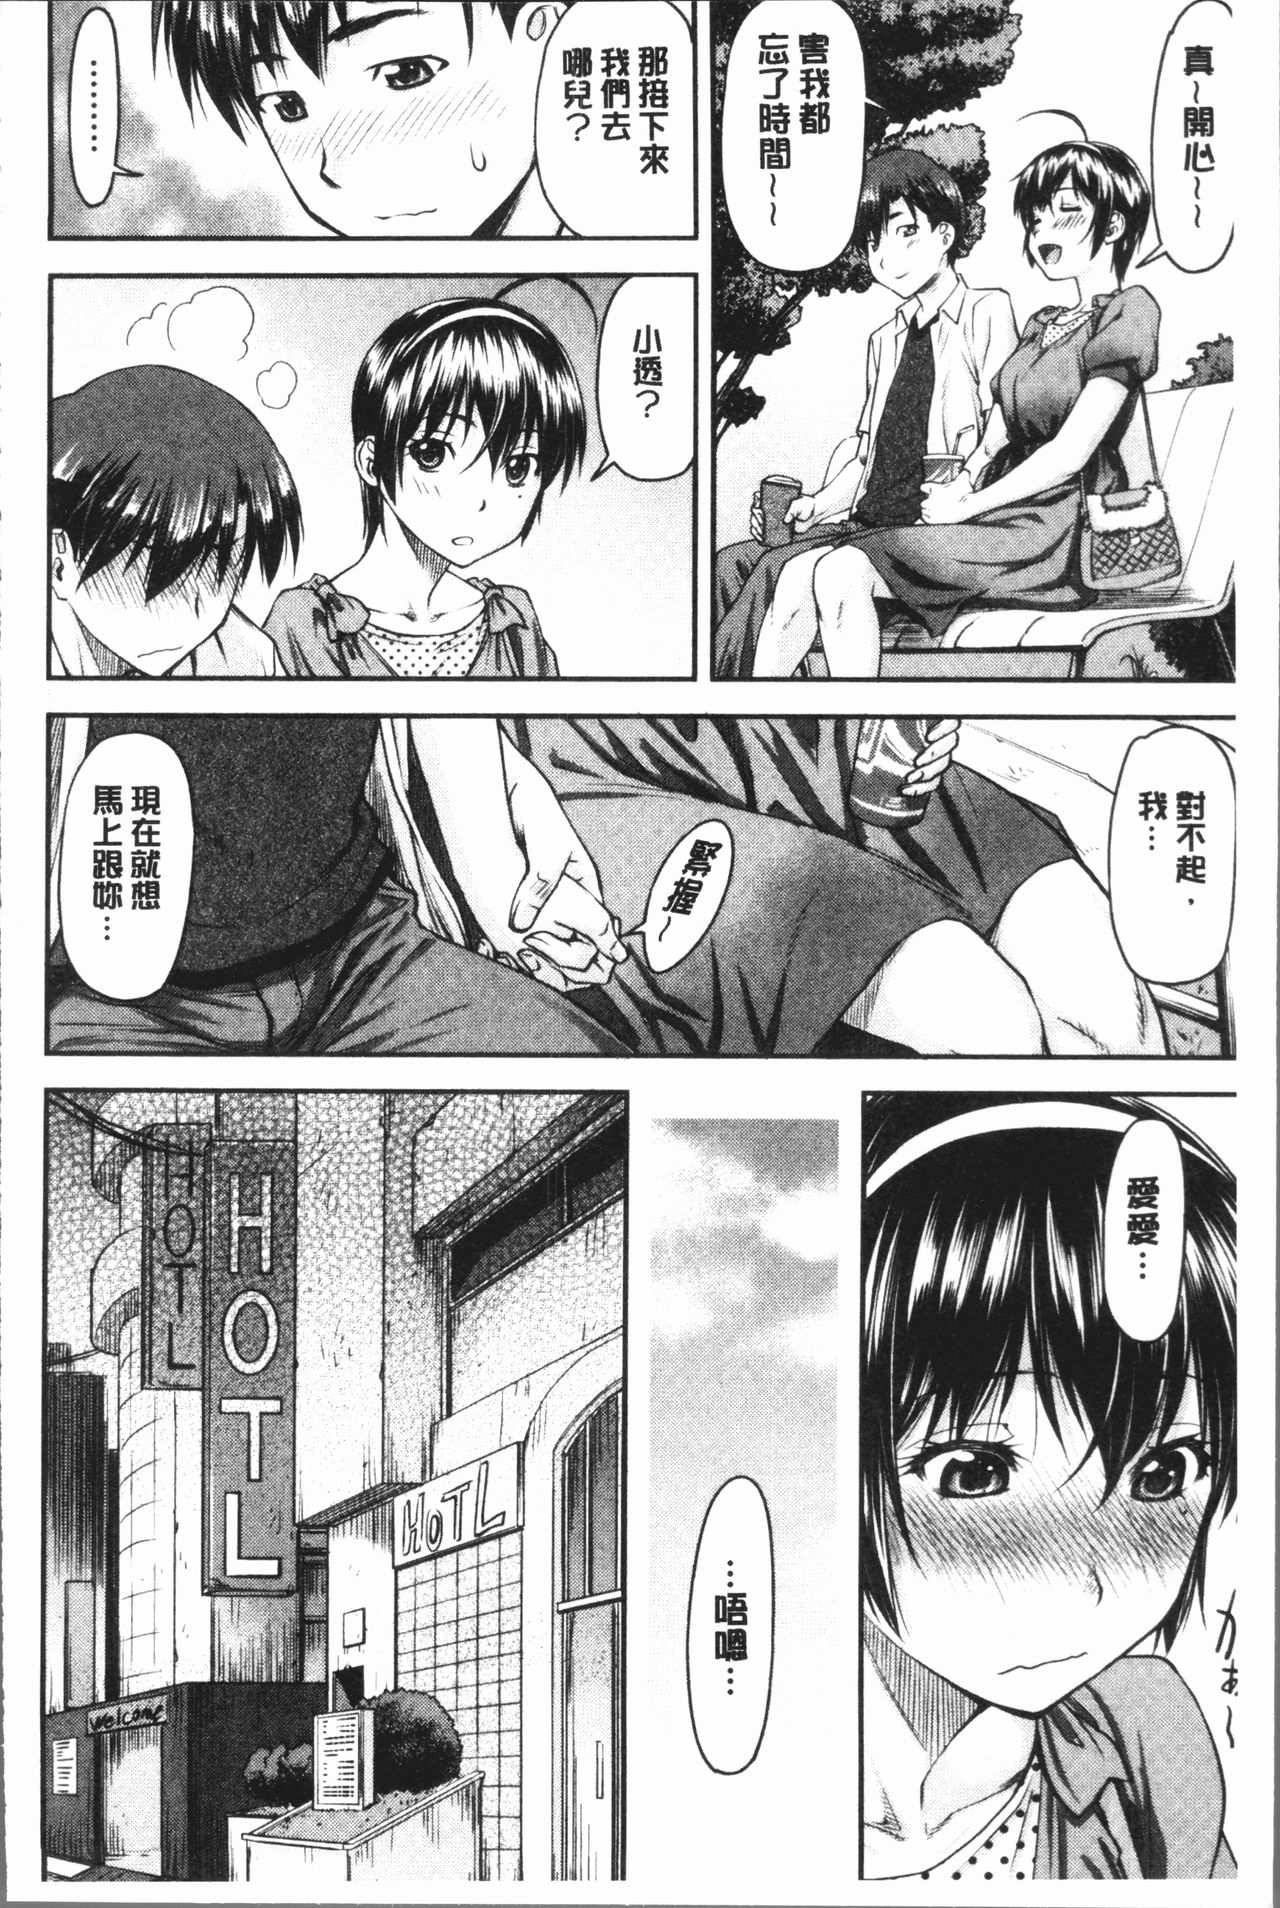 [Nagare Ippon] Kaname Date Jou | 加奈美Date 上 [Chinese] page 38 full